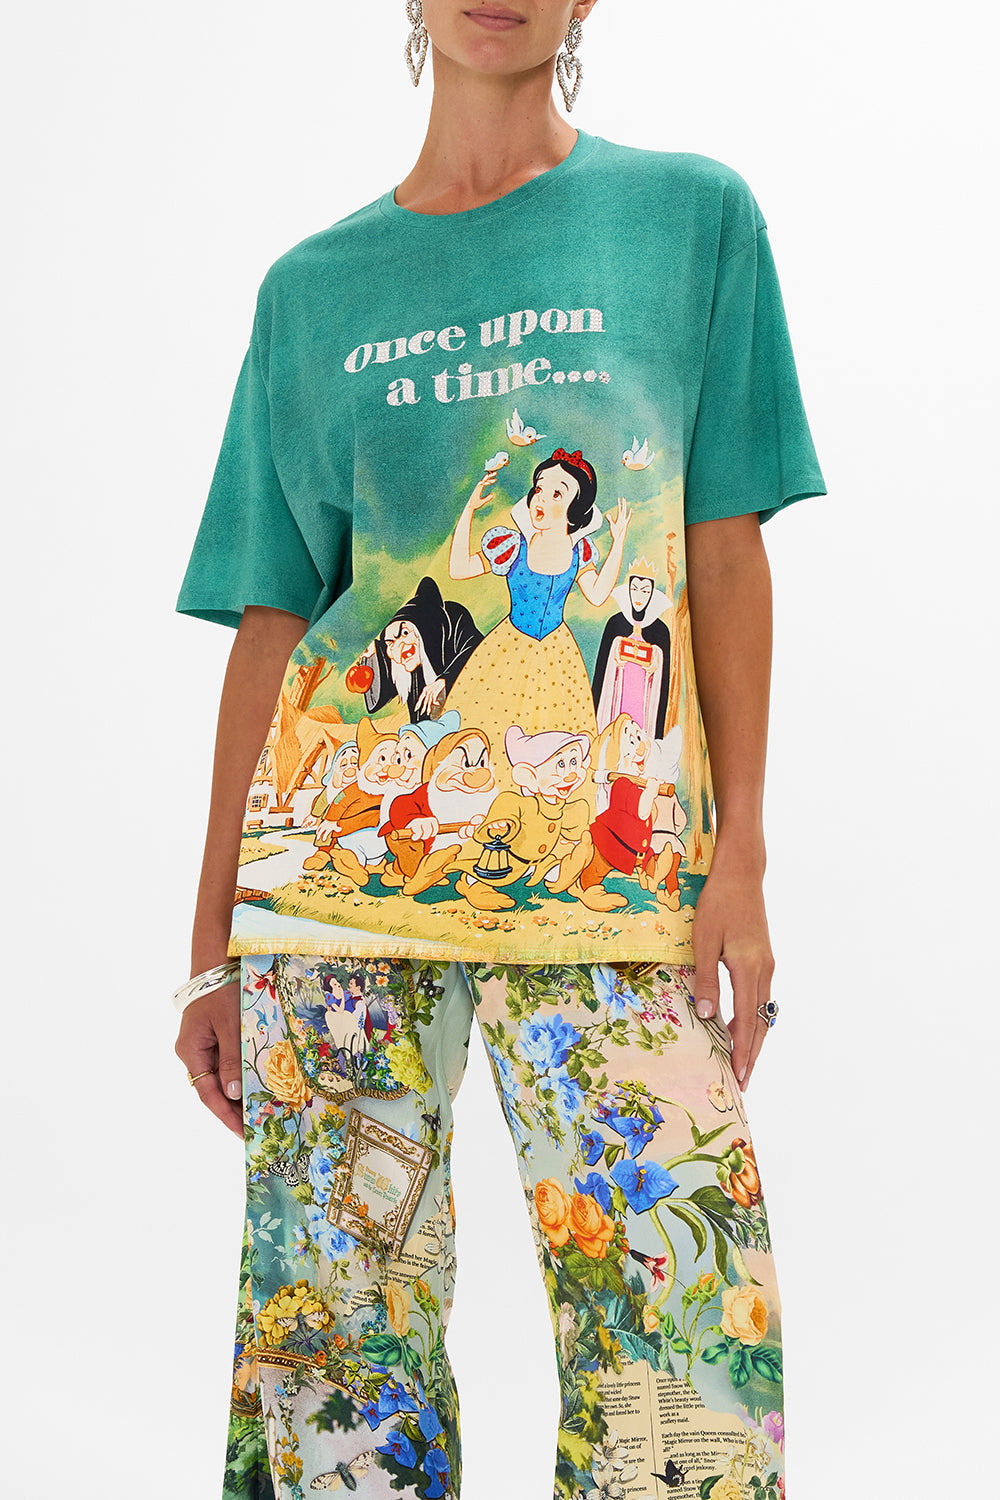 Disney CAMILLA band tee in The Kindest One of All print